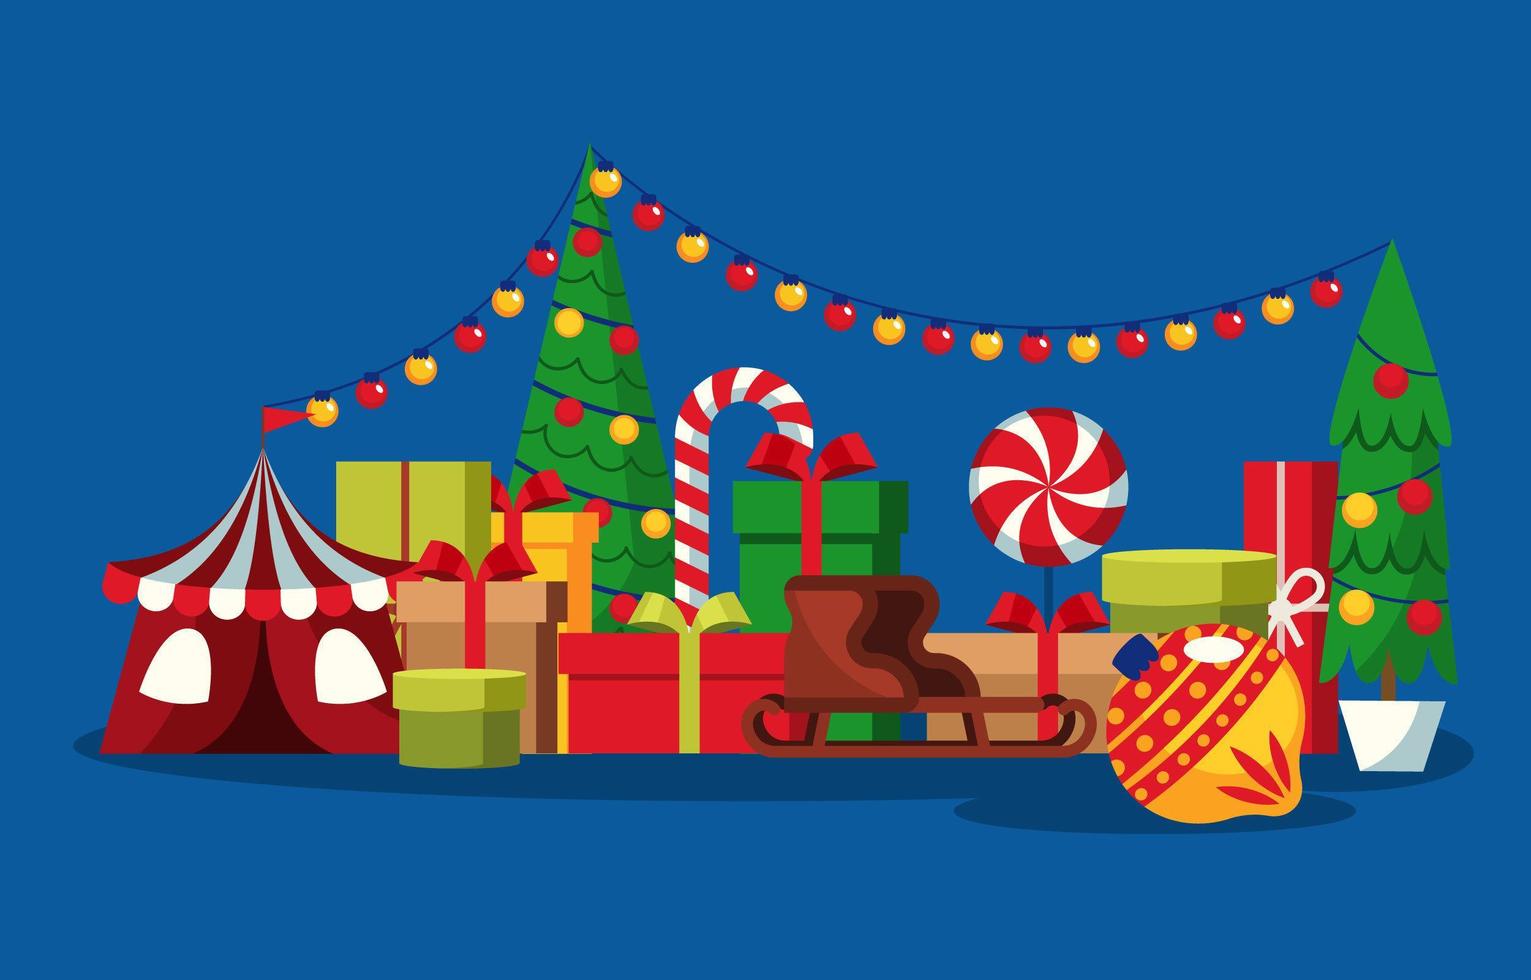 So Many Christmas Gifts for Kids in the Playground vector